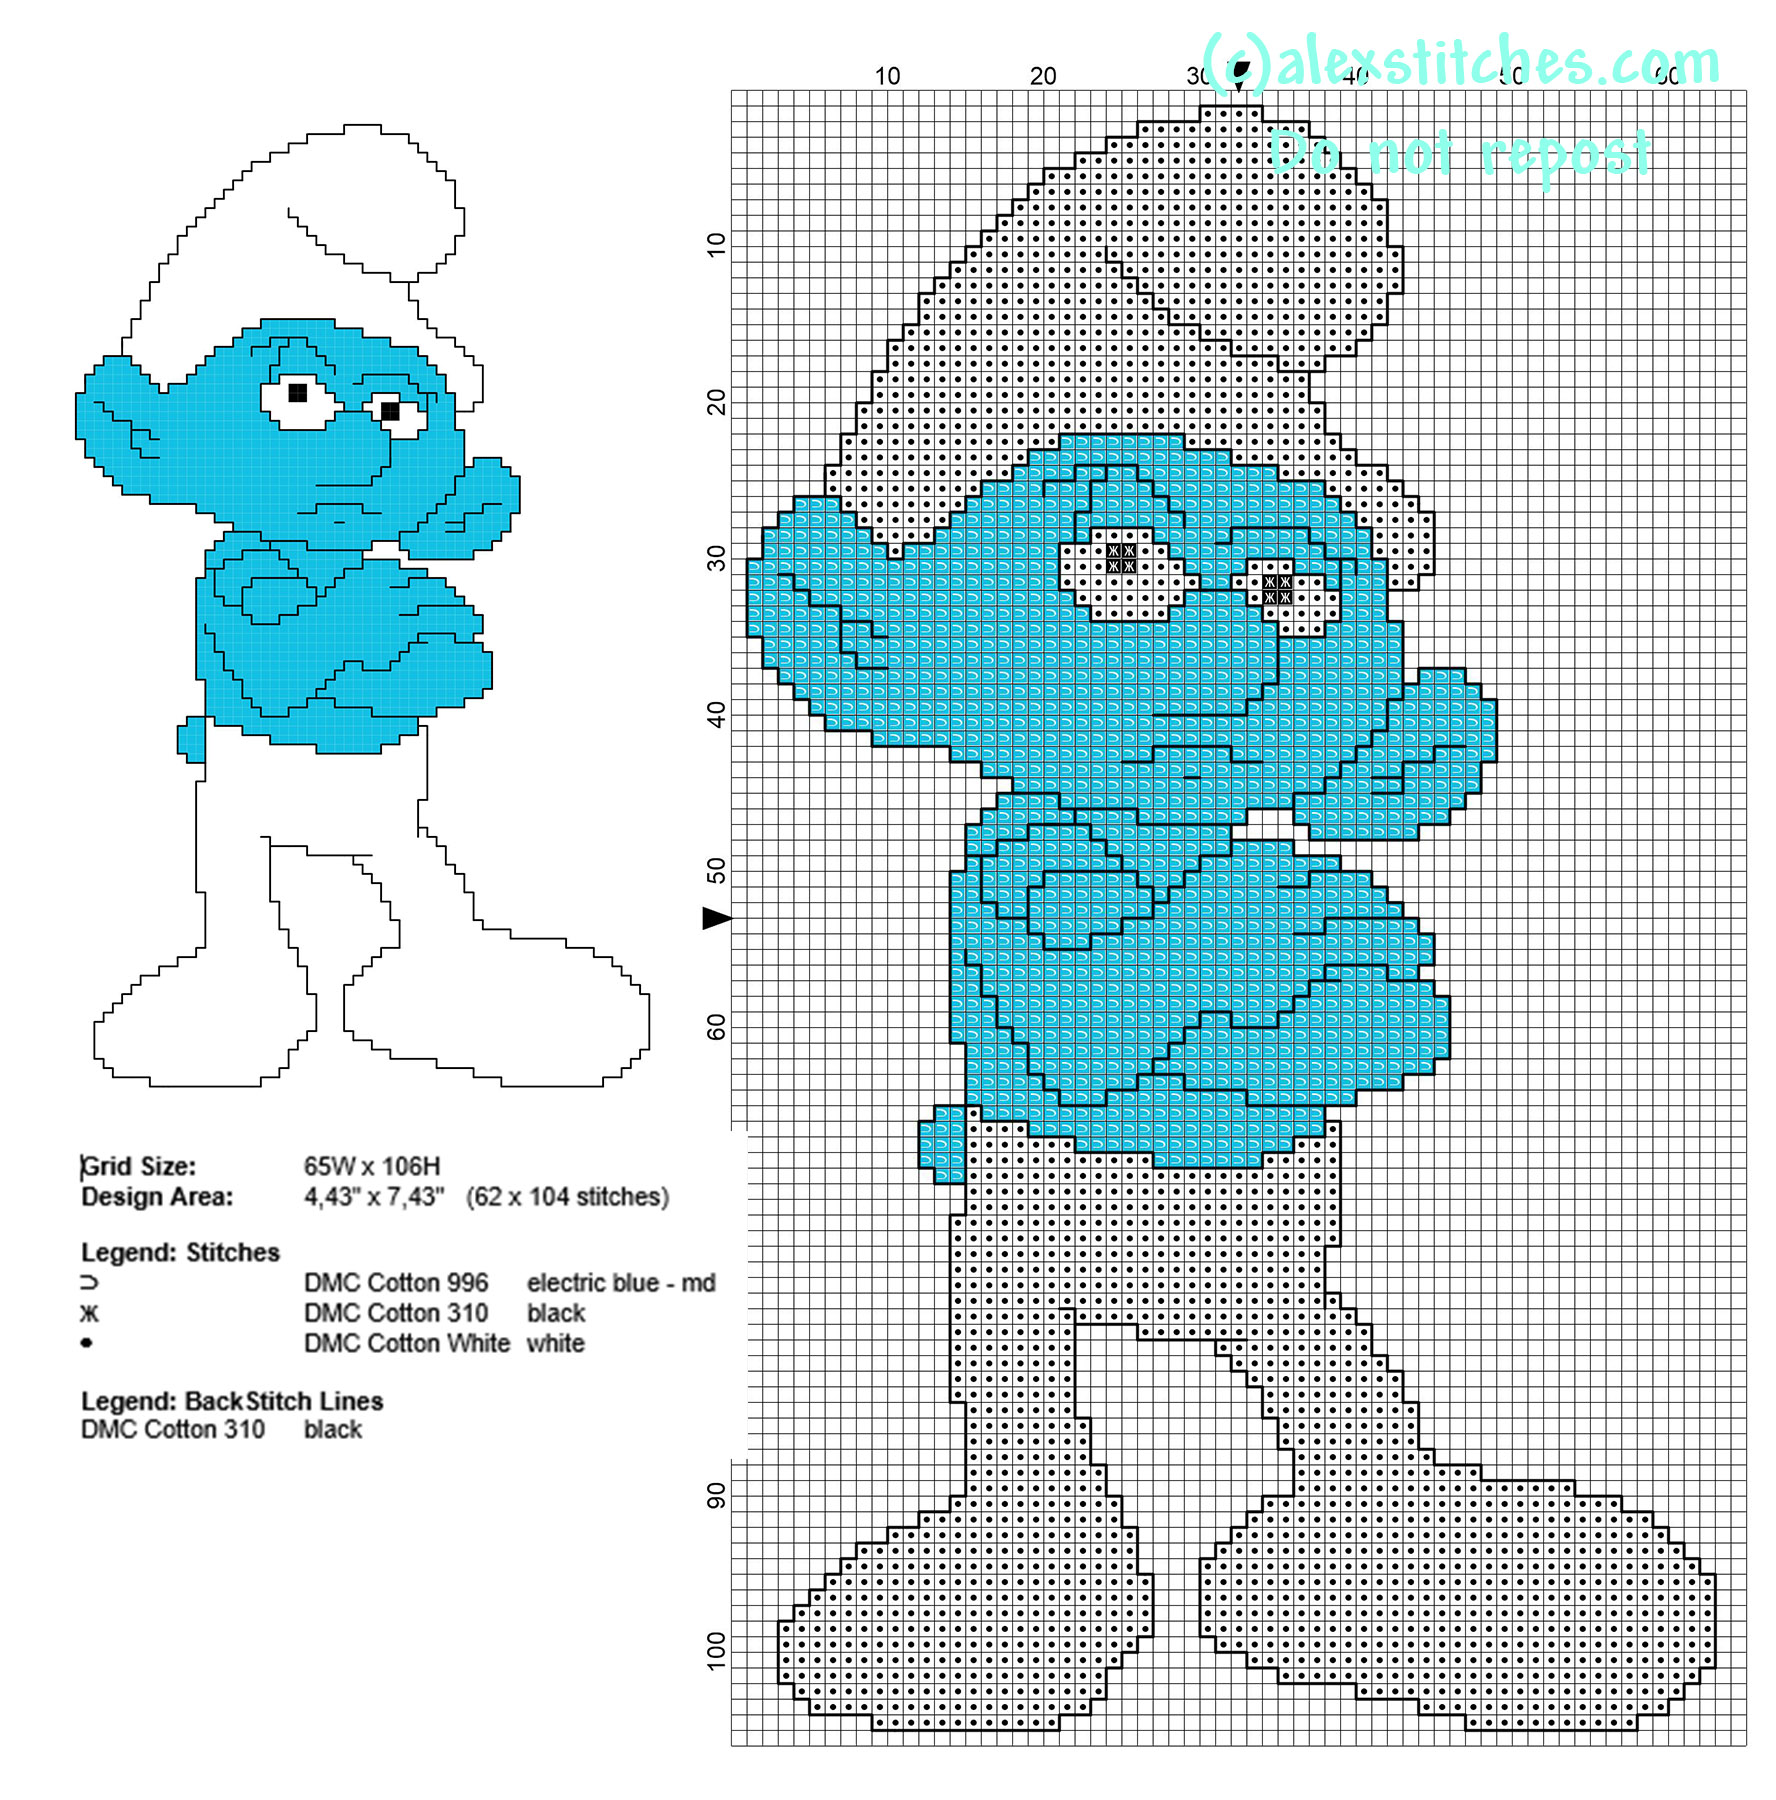 Grouchy Smurf The Smurfs character free cross stitch pattern with back stitch